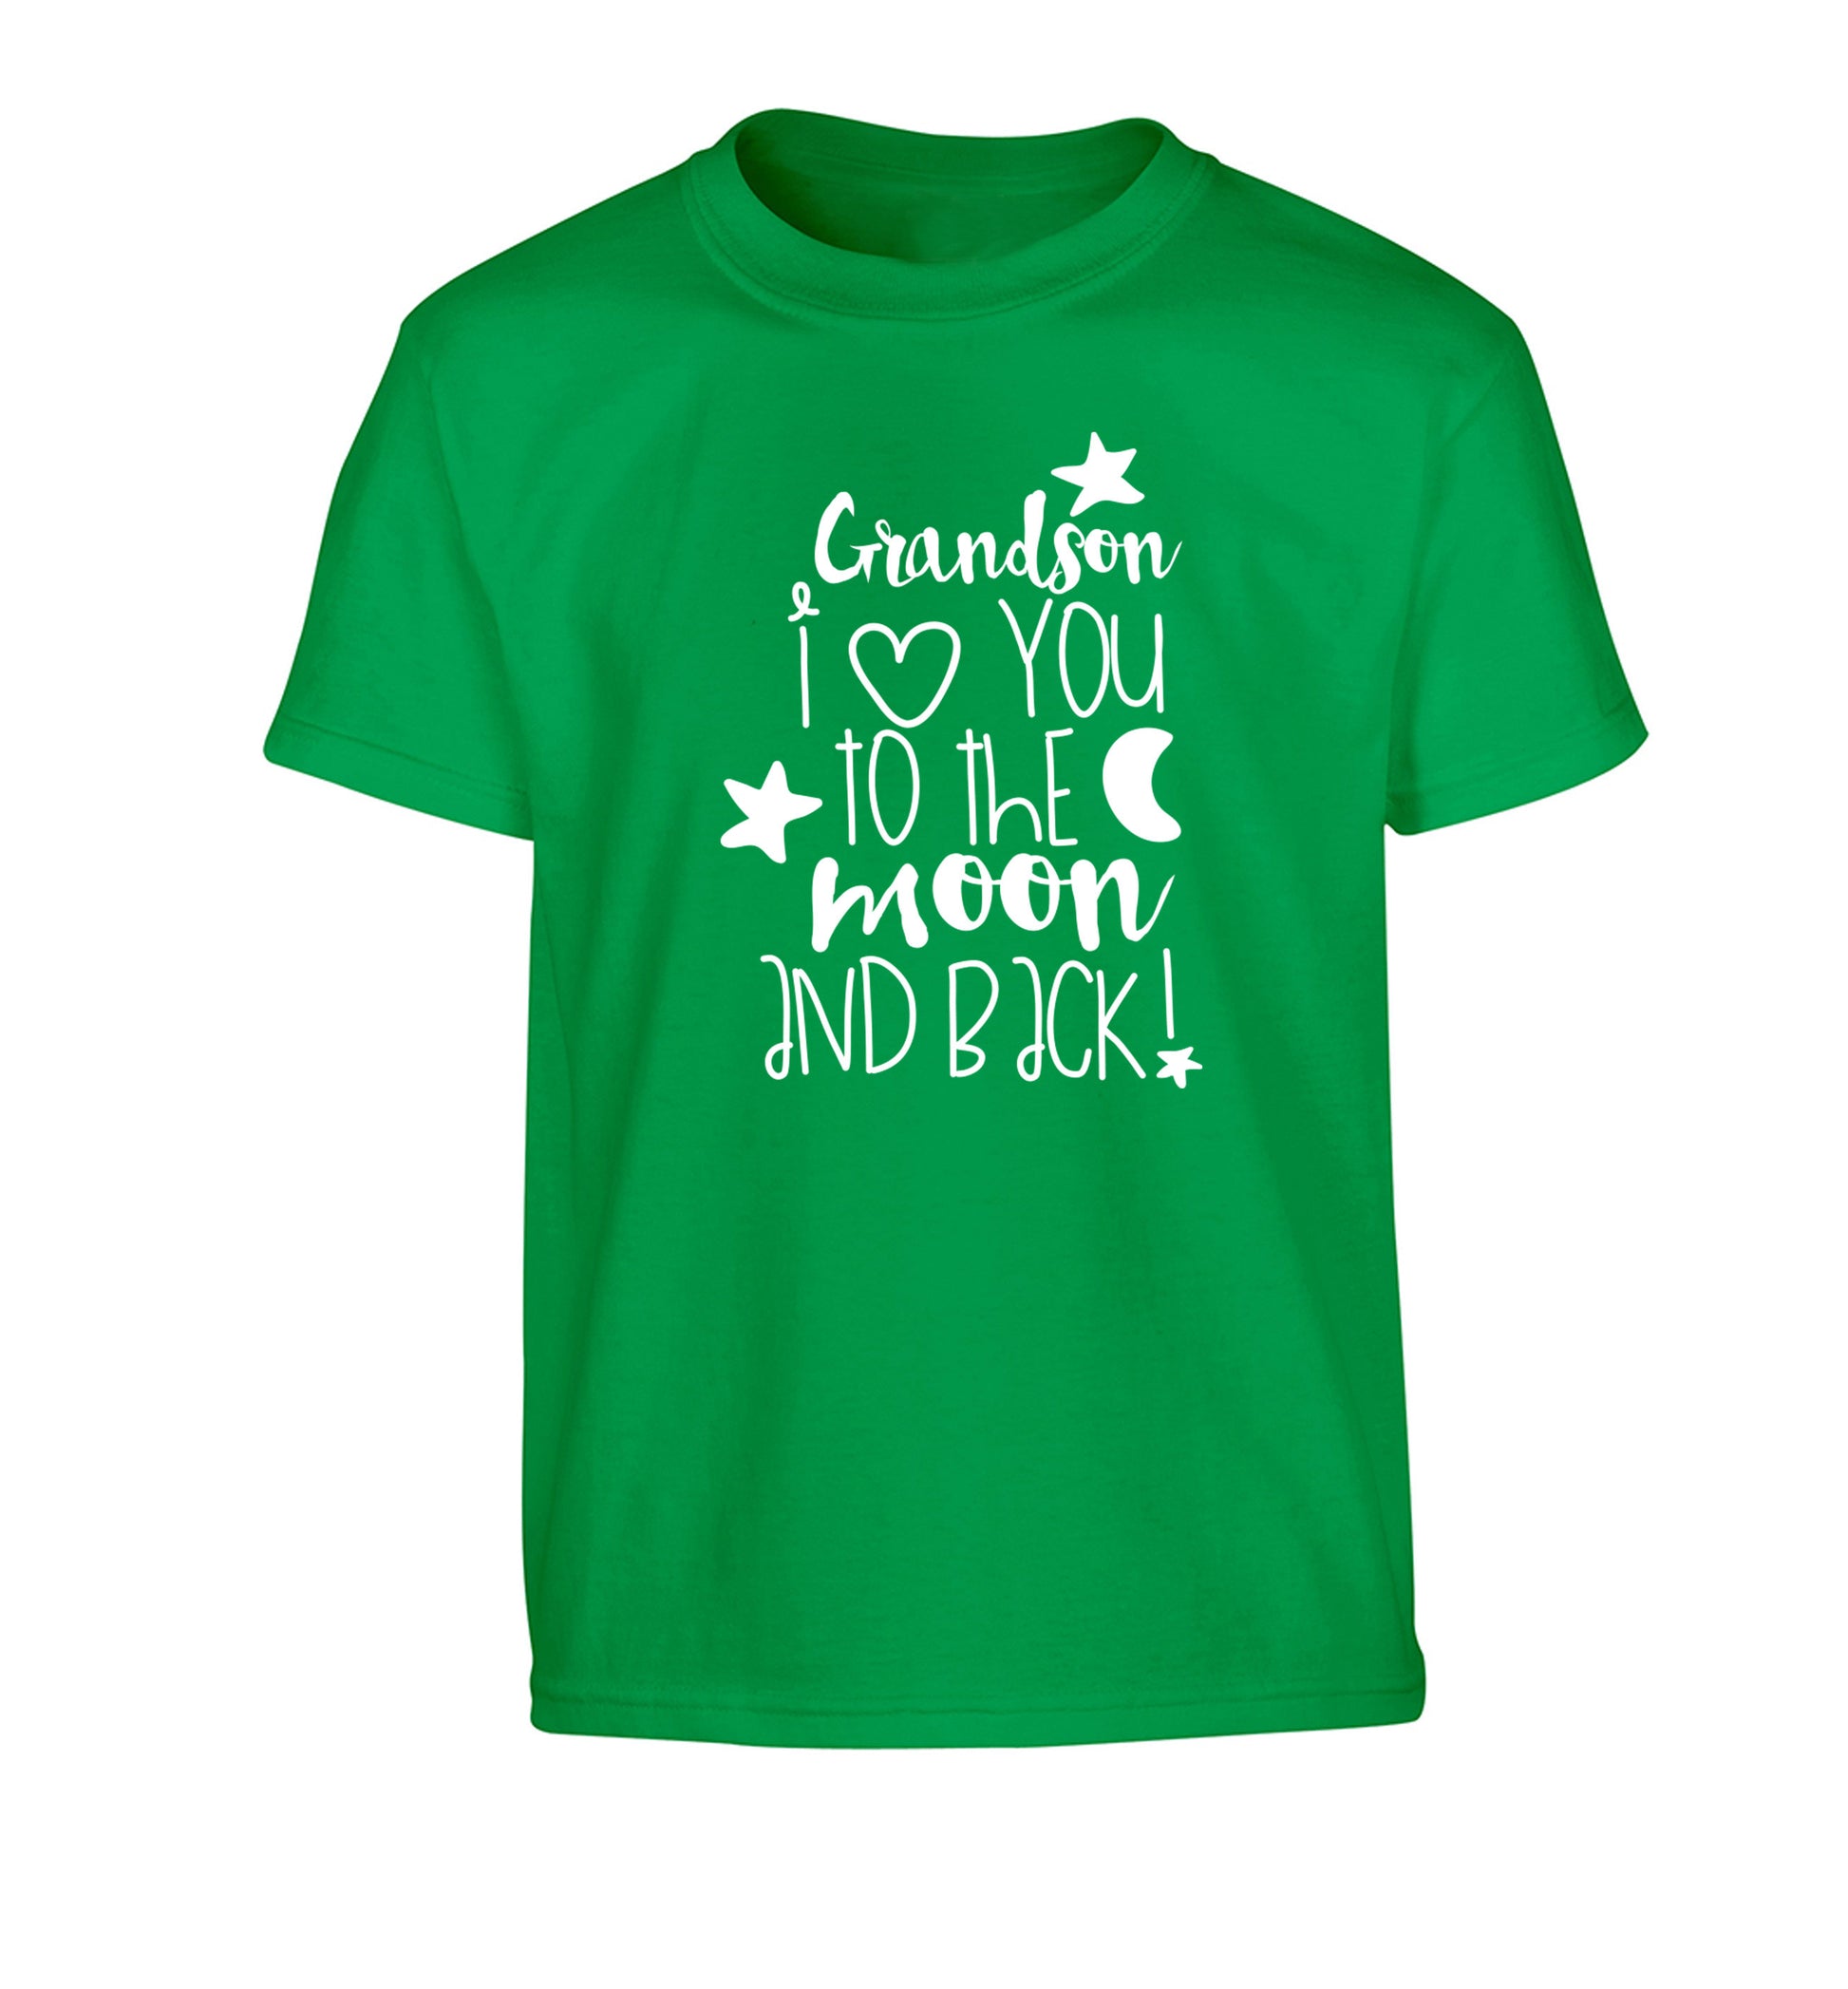 Grandson I love you to the moon and back Children's green Tshirt 12-14 Years